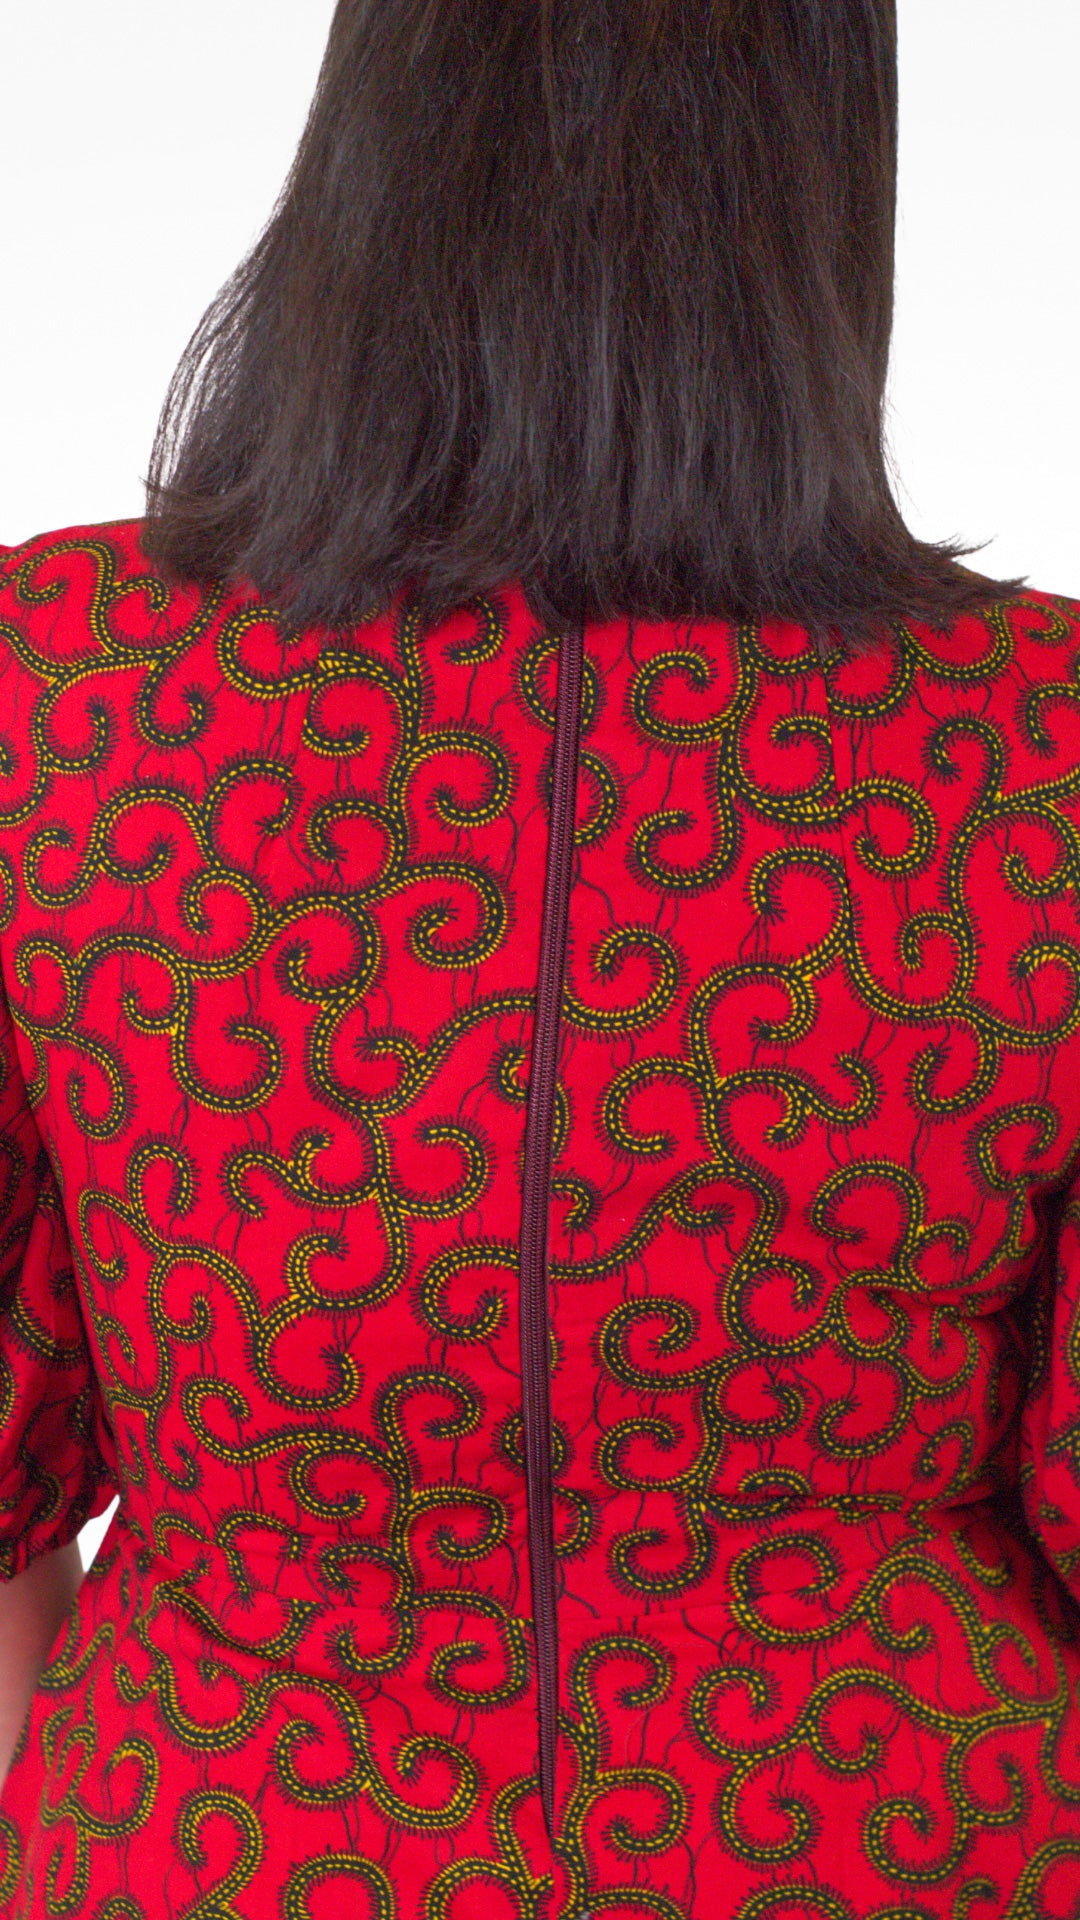 A rear view of the red dress, showcasing the zipper closure at the back.